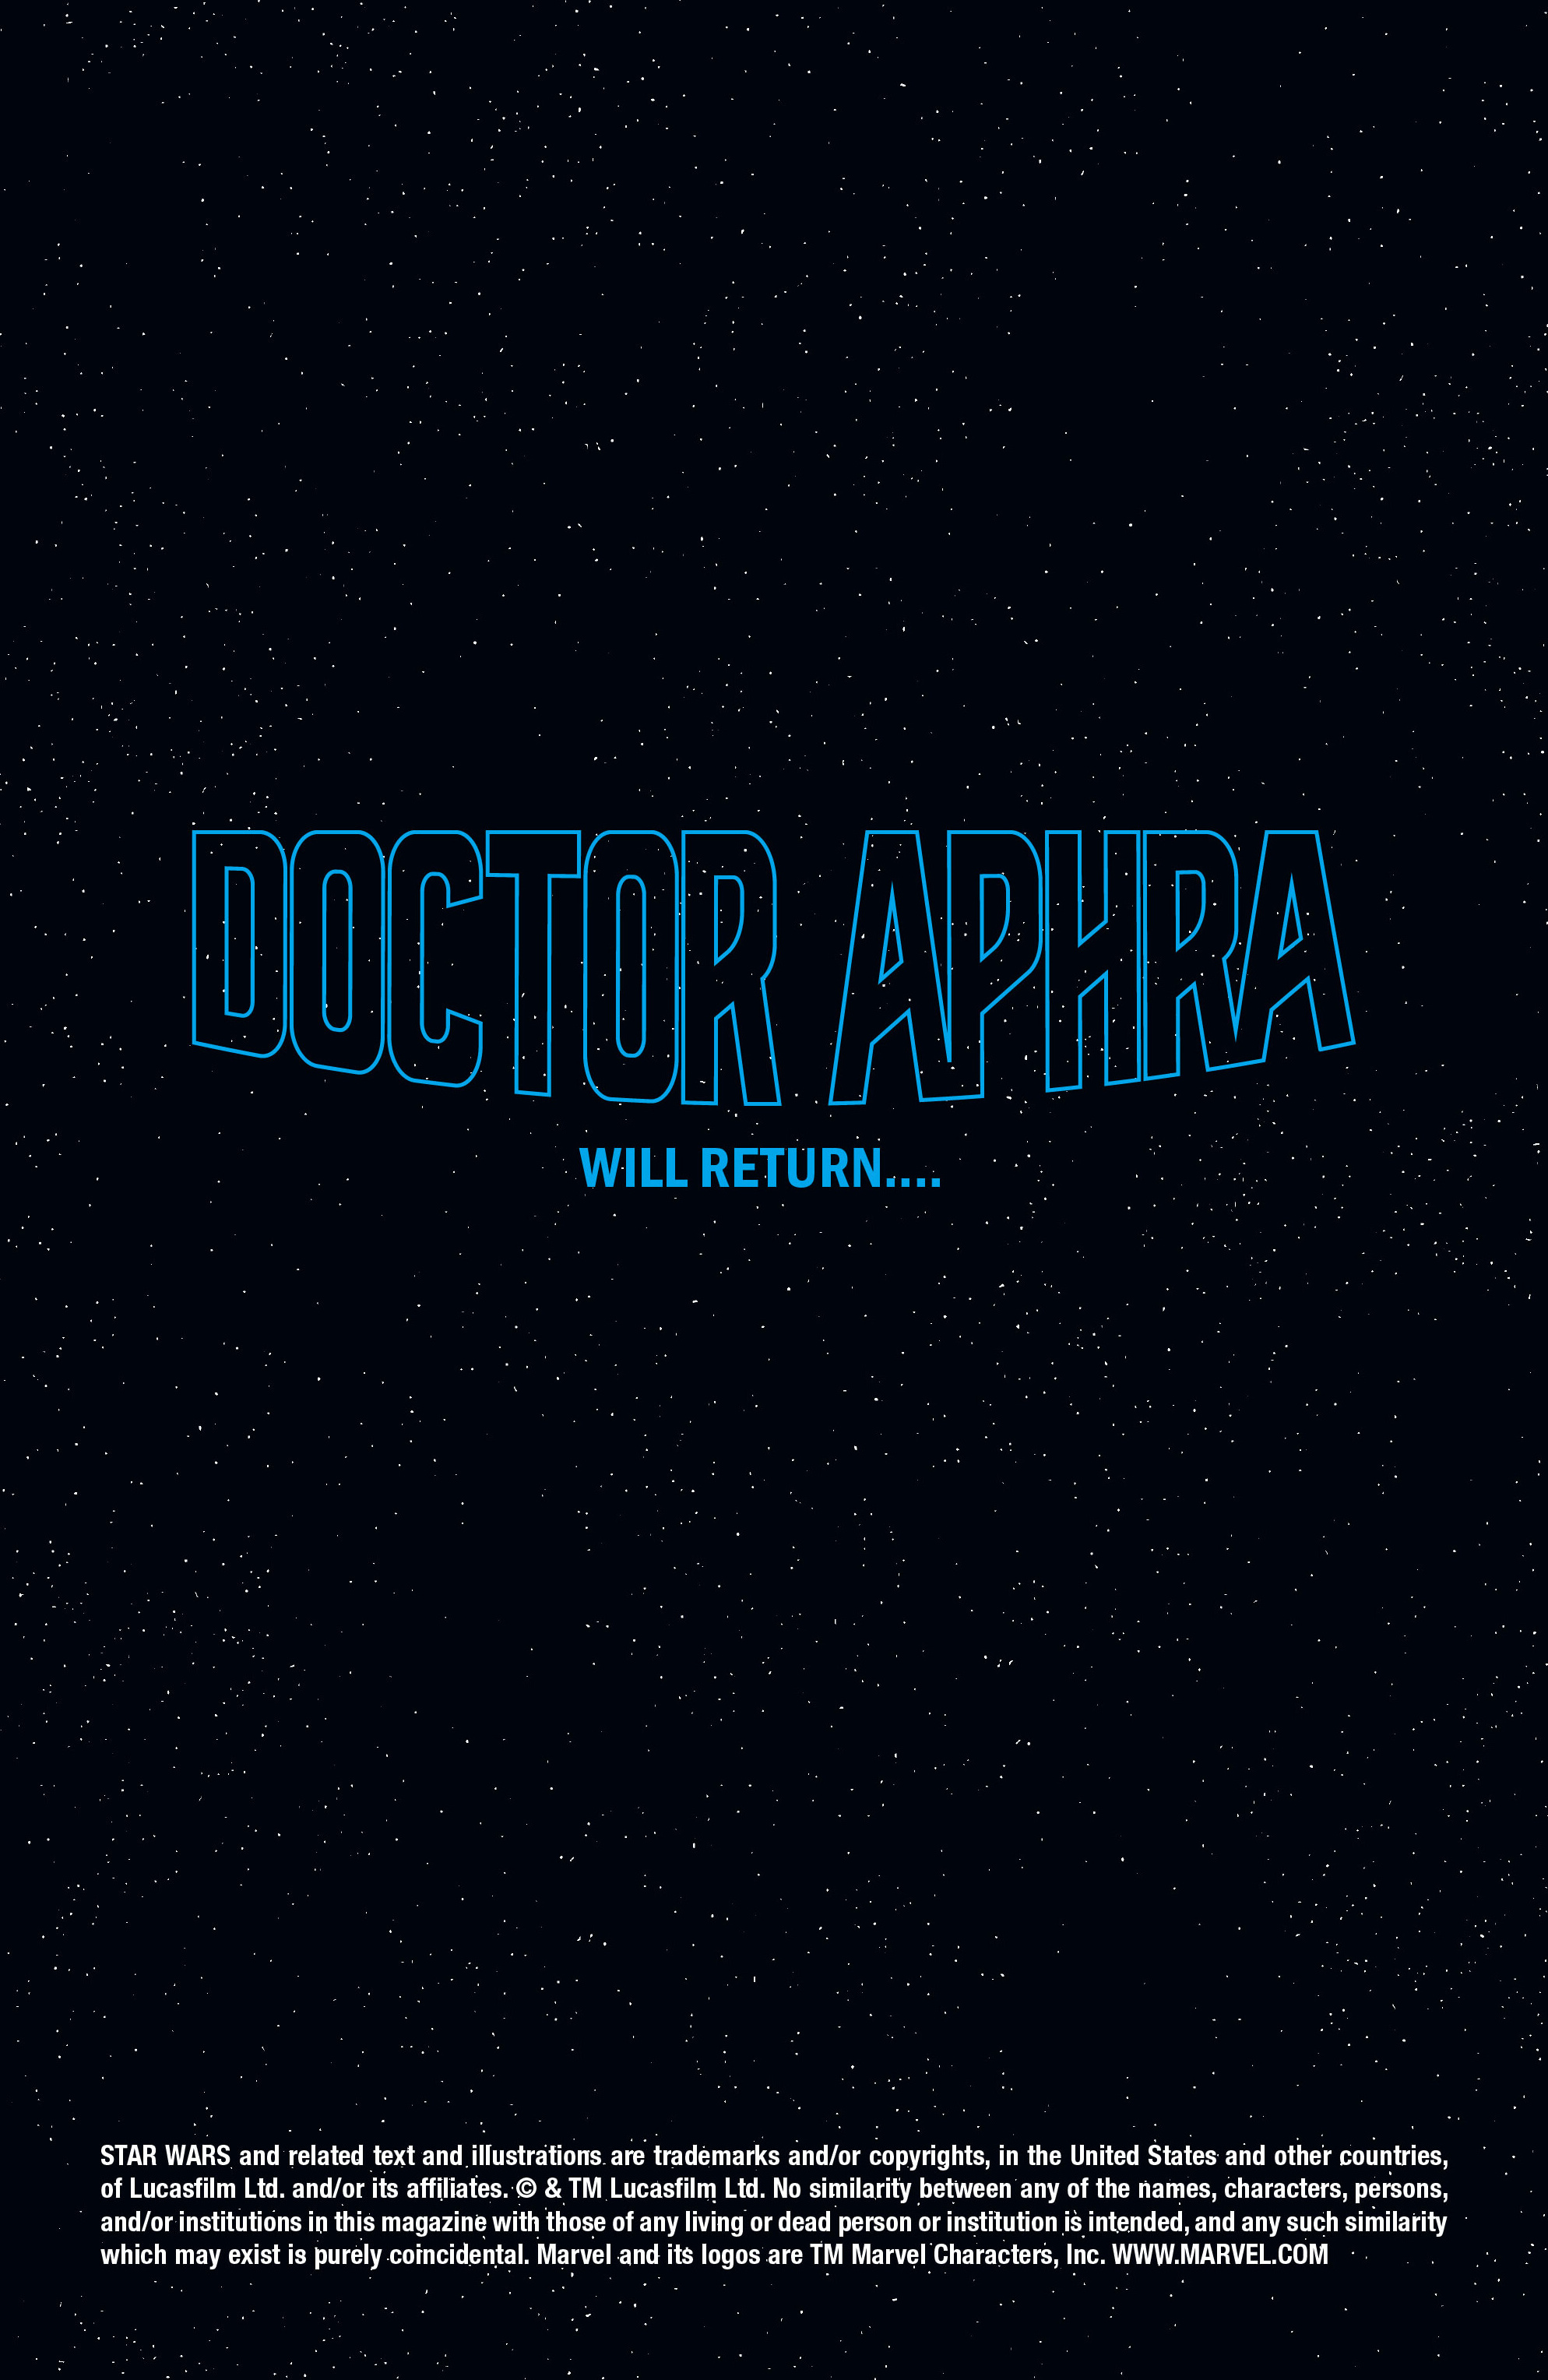 Read online Star Wars: Doctor Aphra comic -  Issue #40 - 24